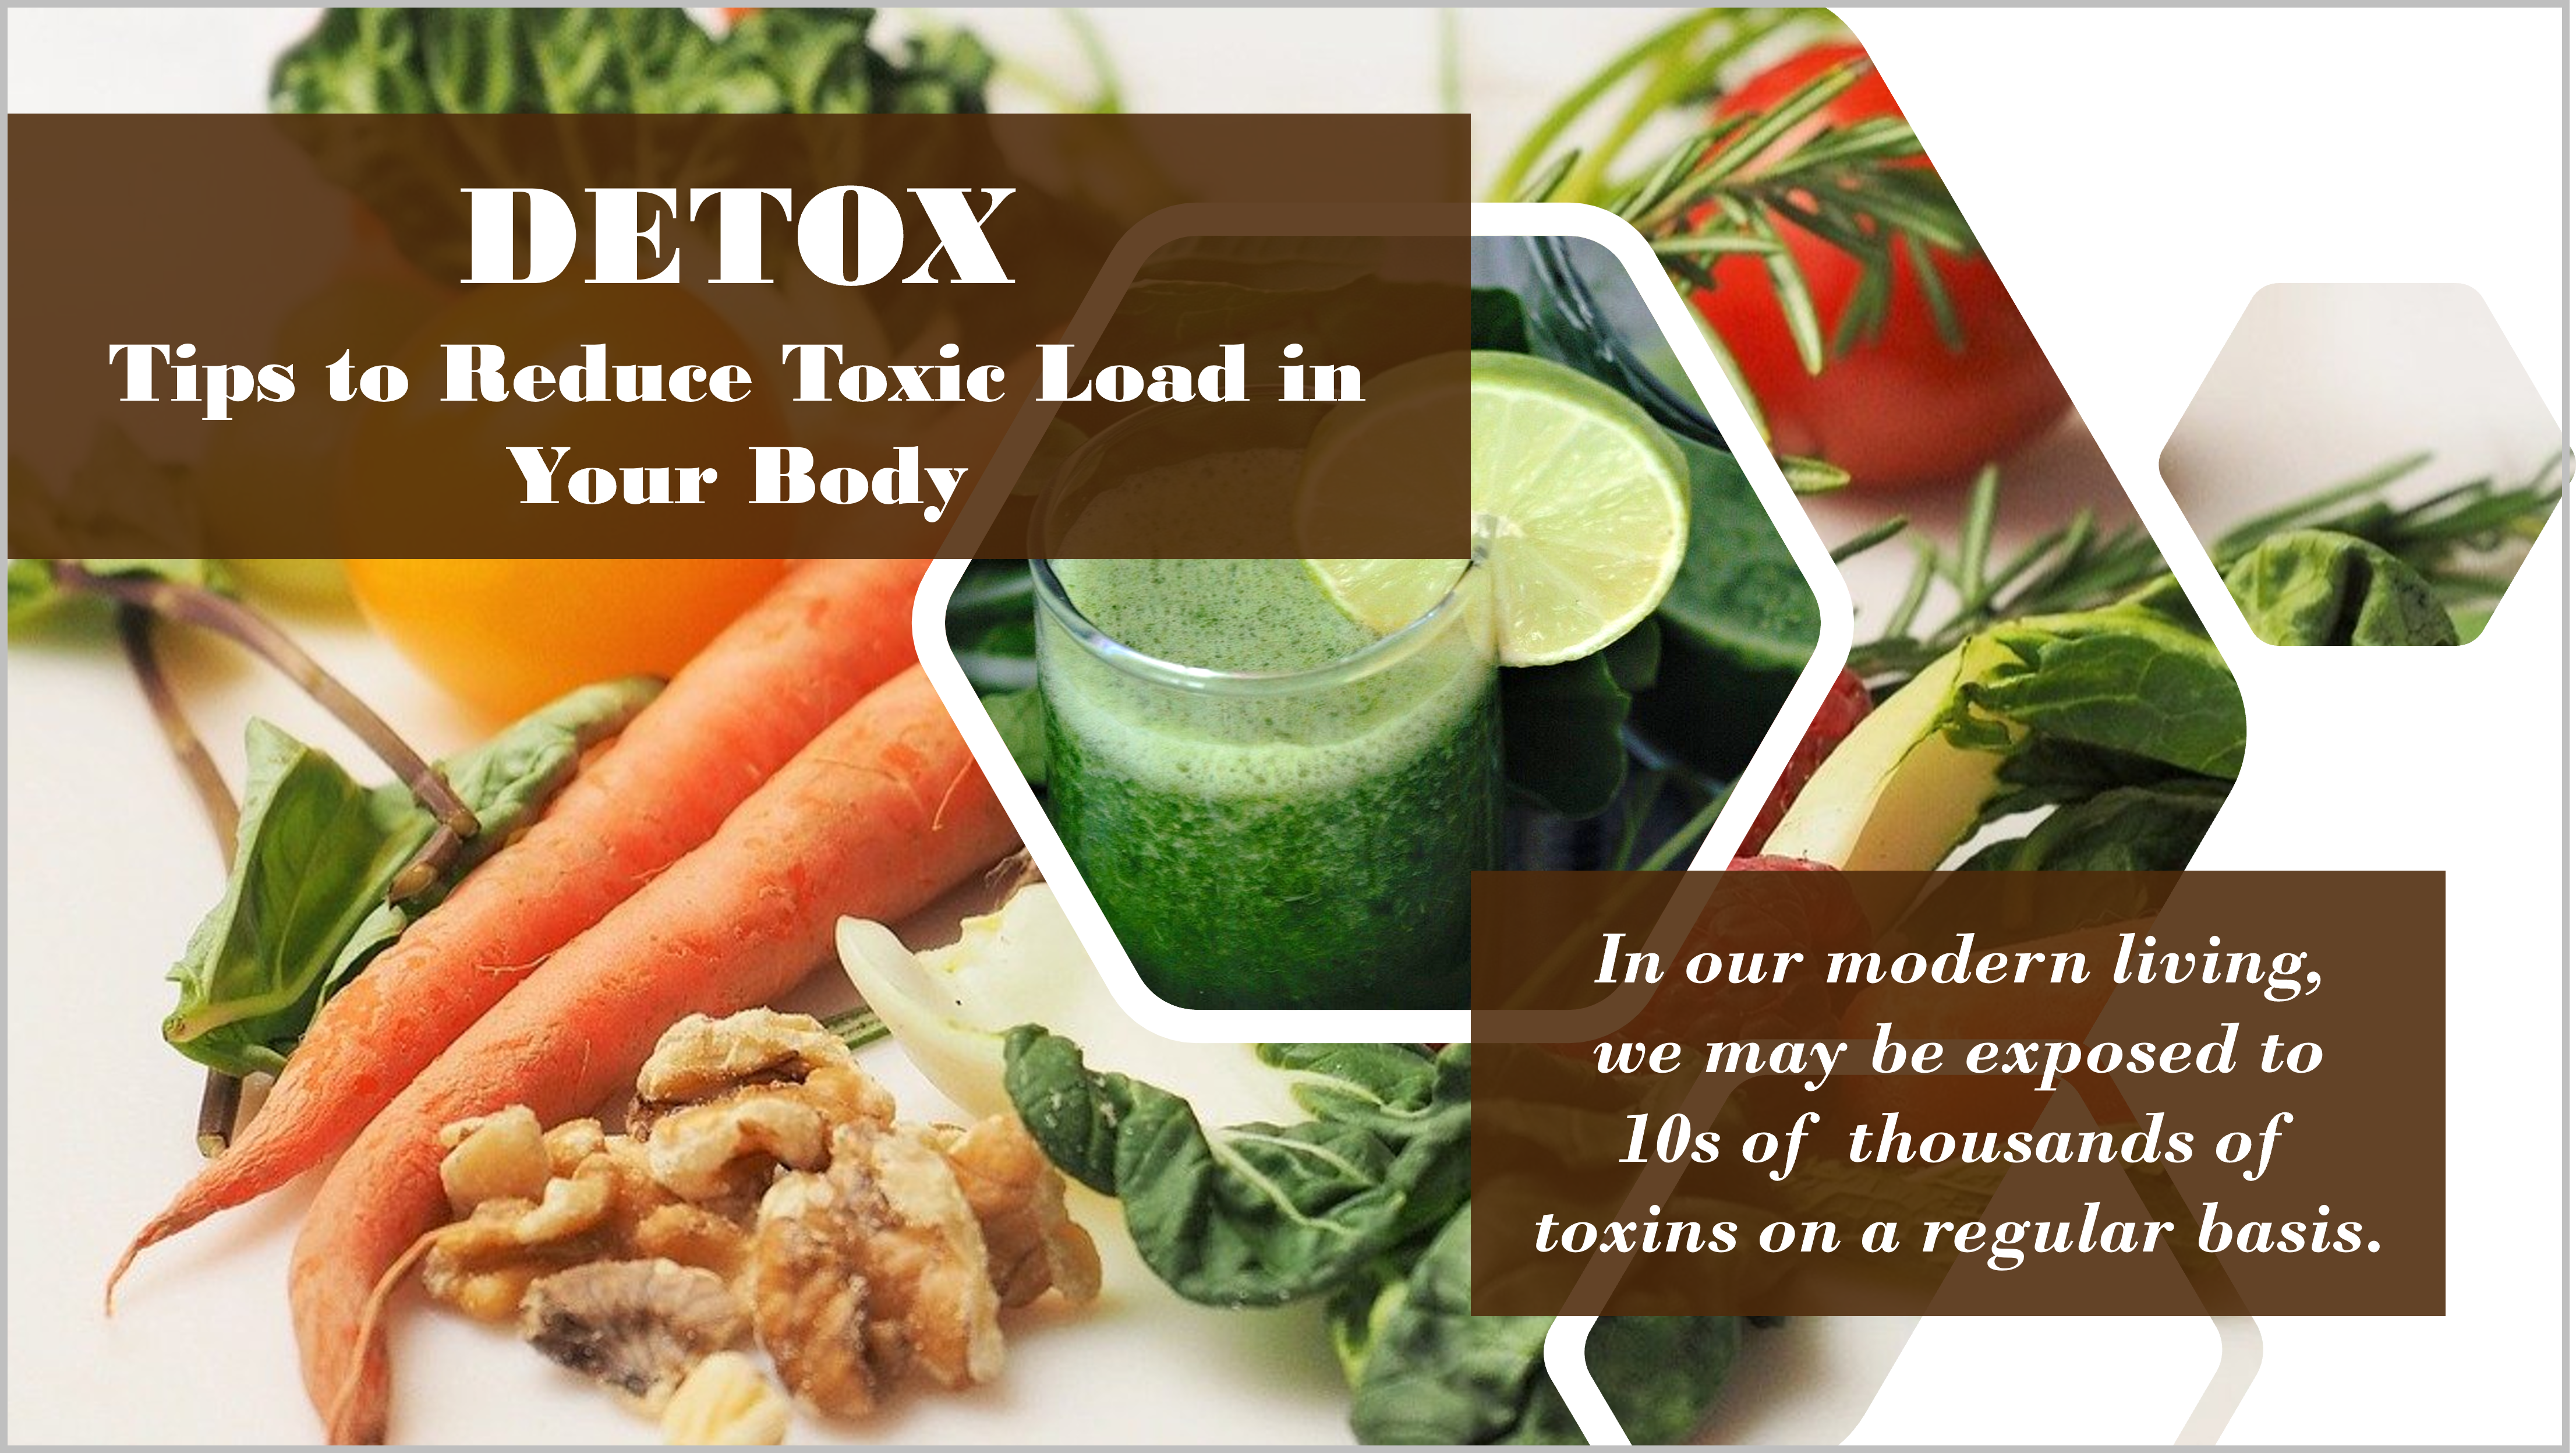 How Toxins Affect Your Health and Tips to Reduce Toxic Load